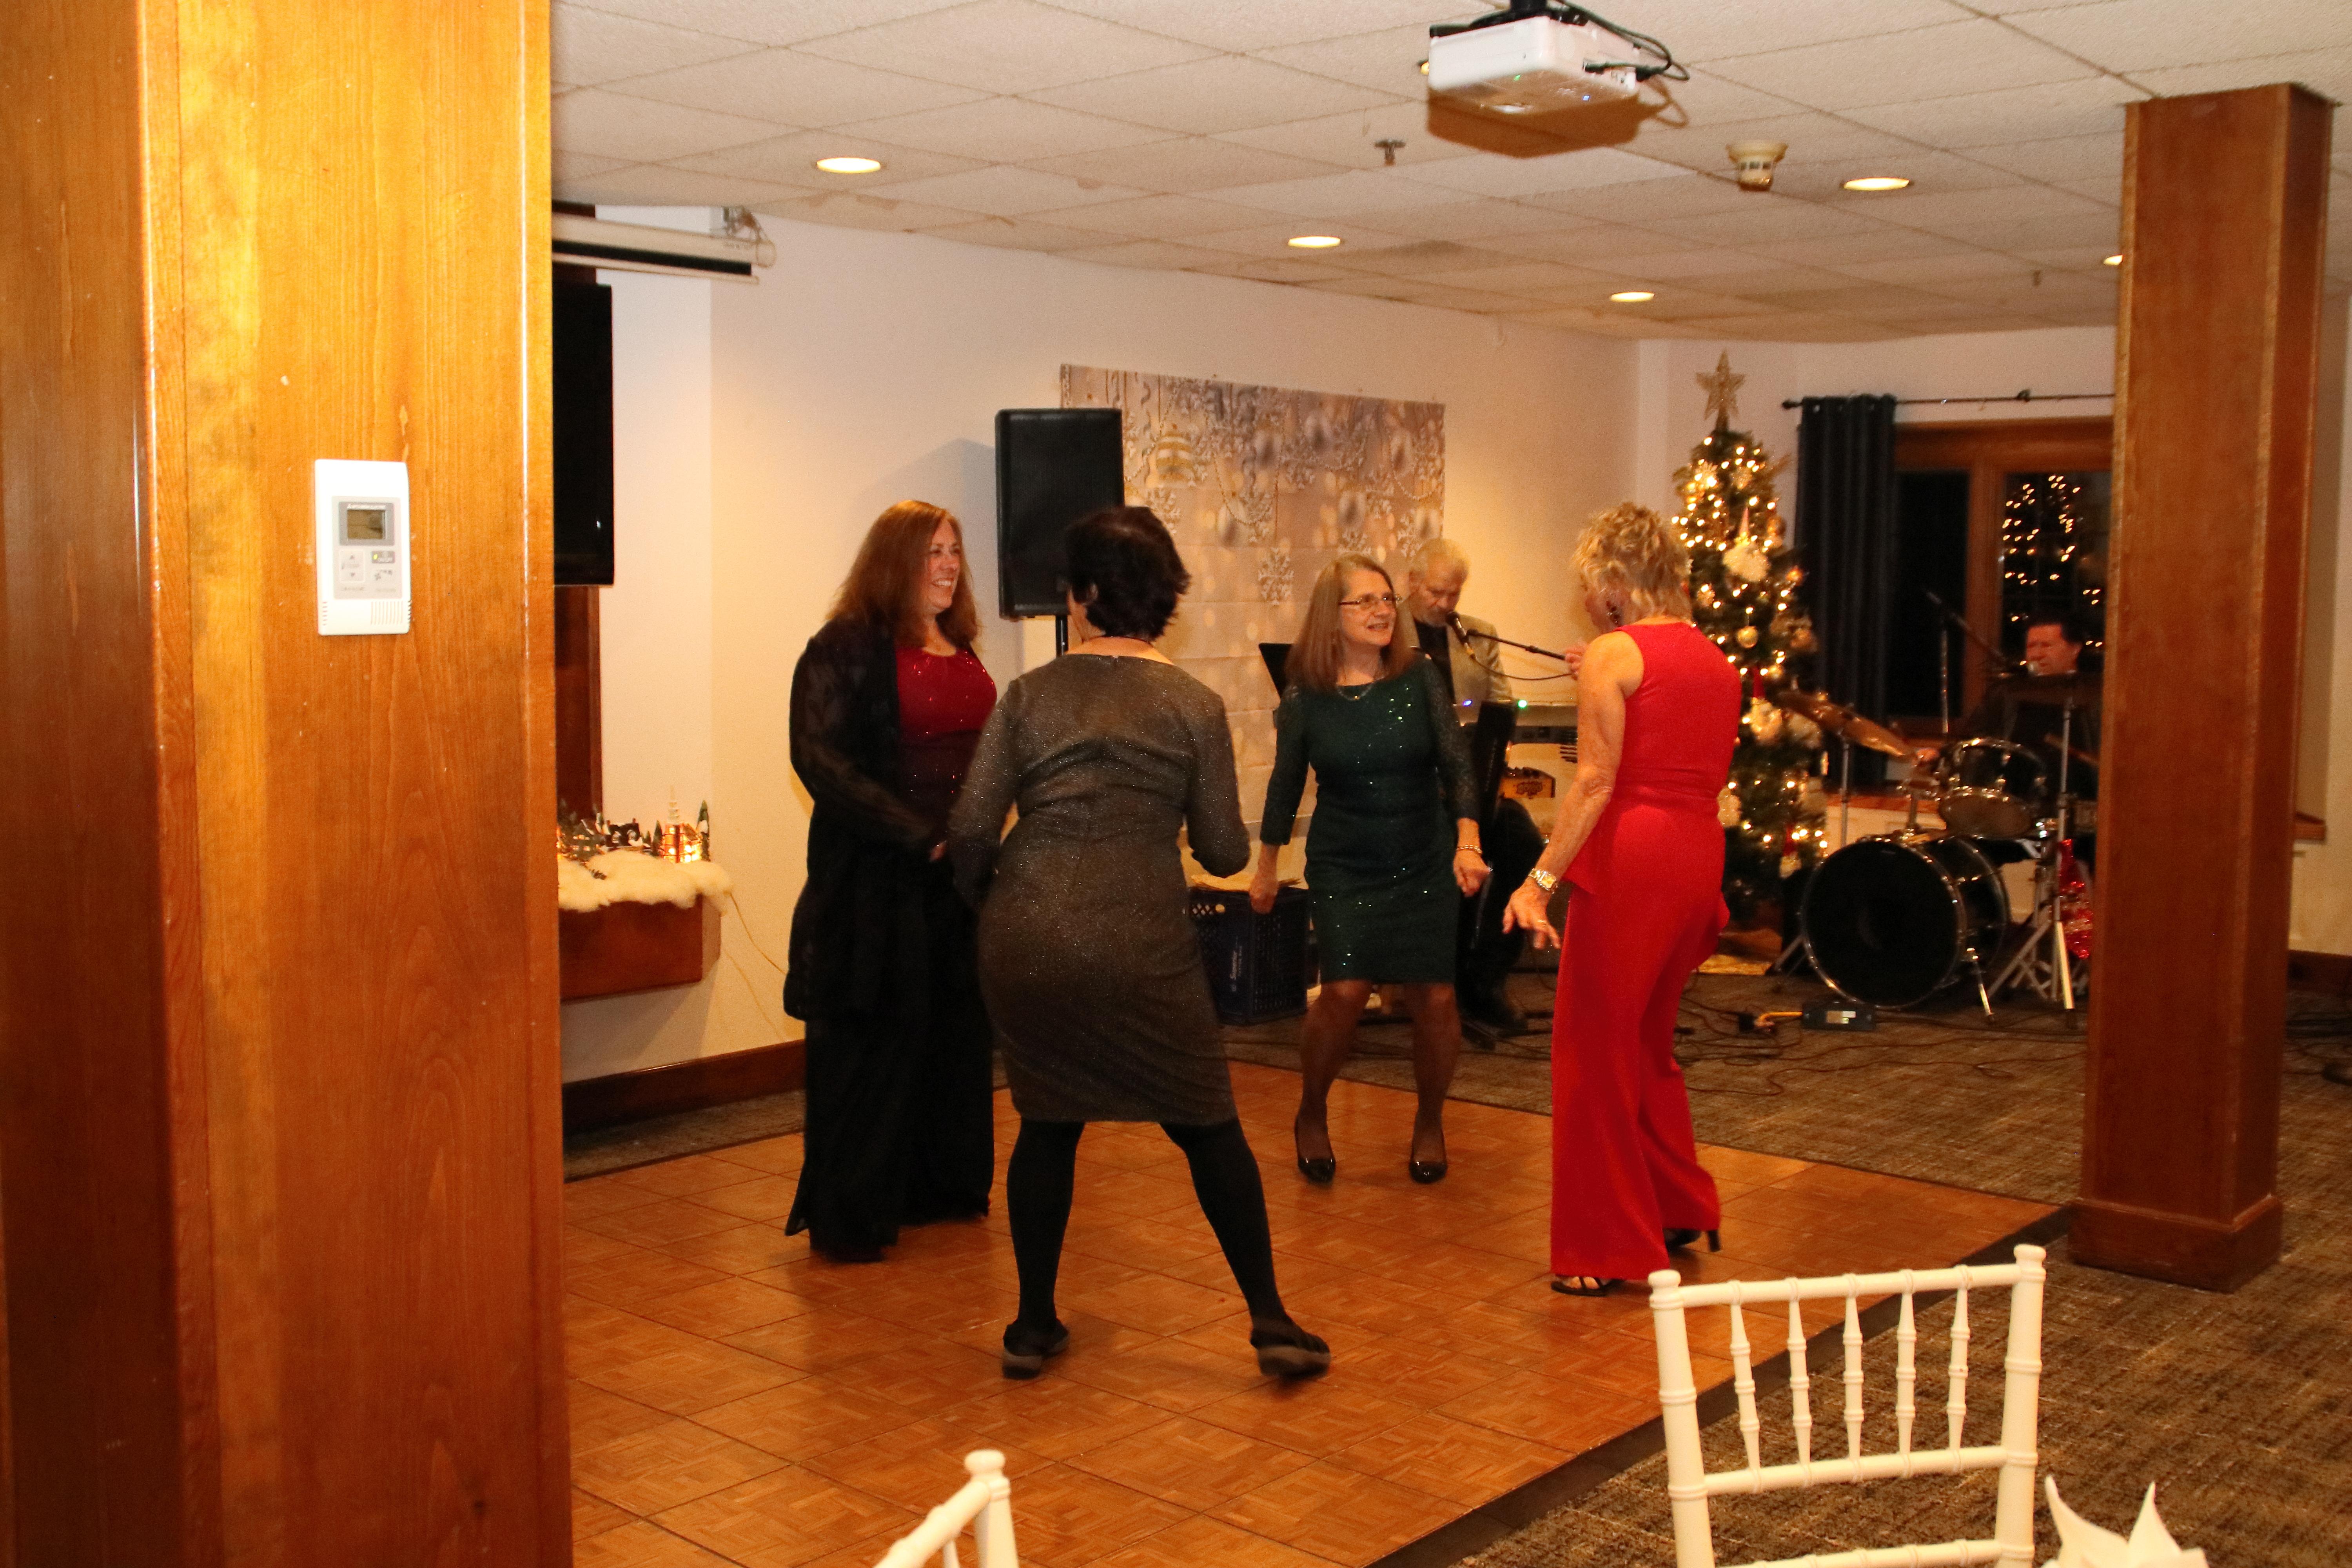 Group of dancers at holiday party